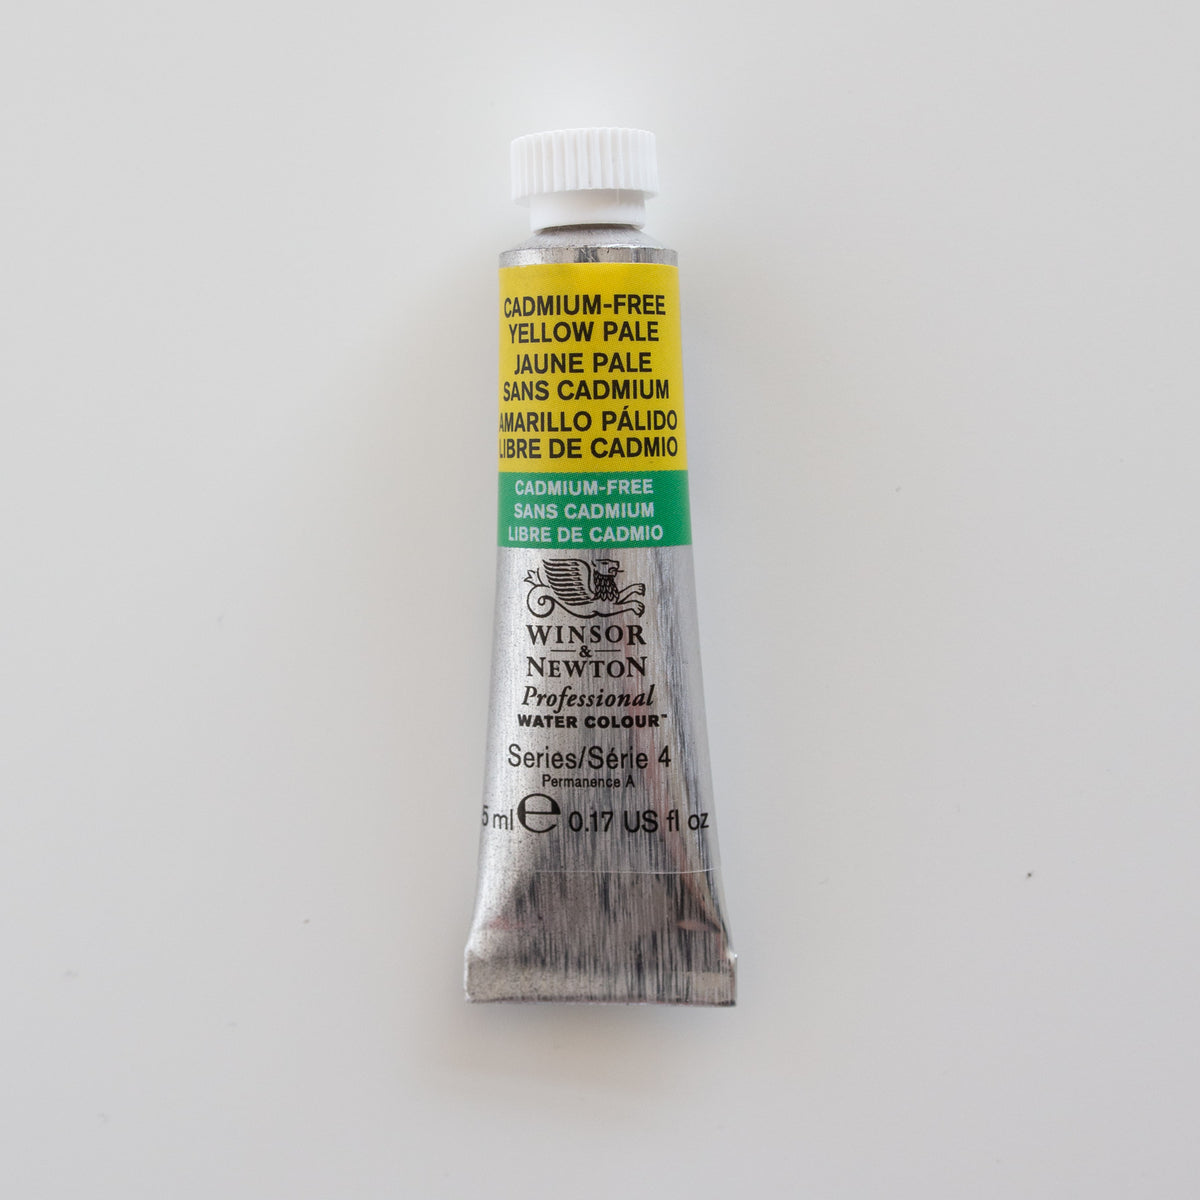 Winsor & Newton Professional Water Colours 5ml Cadmium-Free Yellow Pale 4